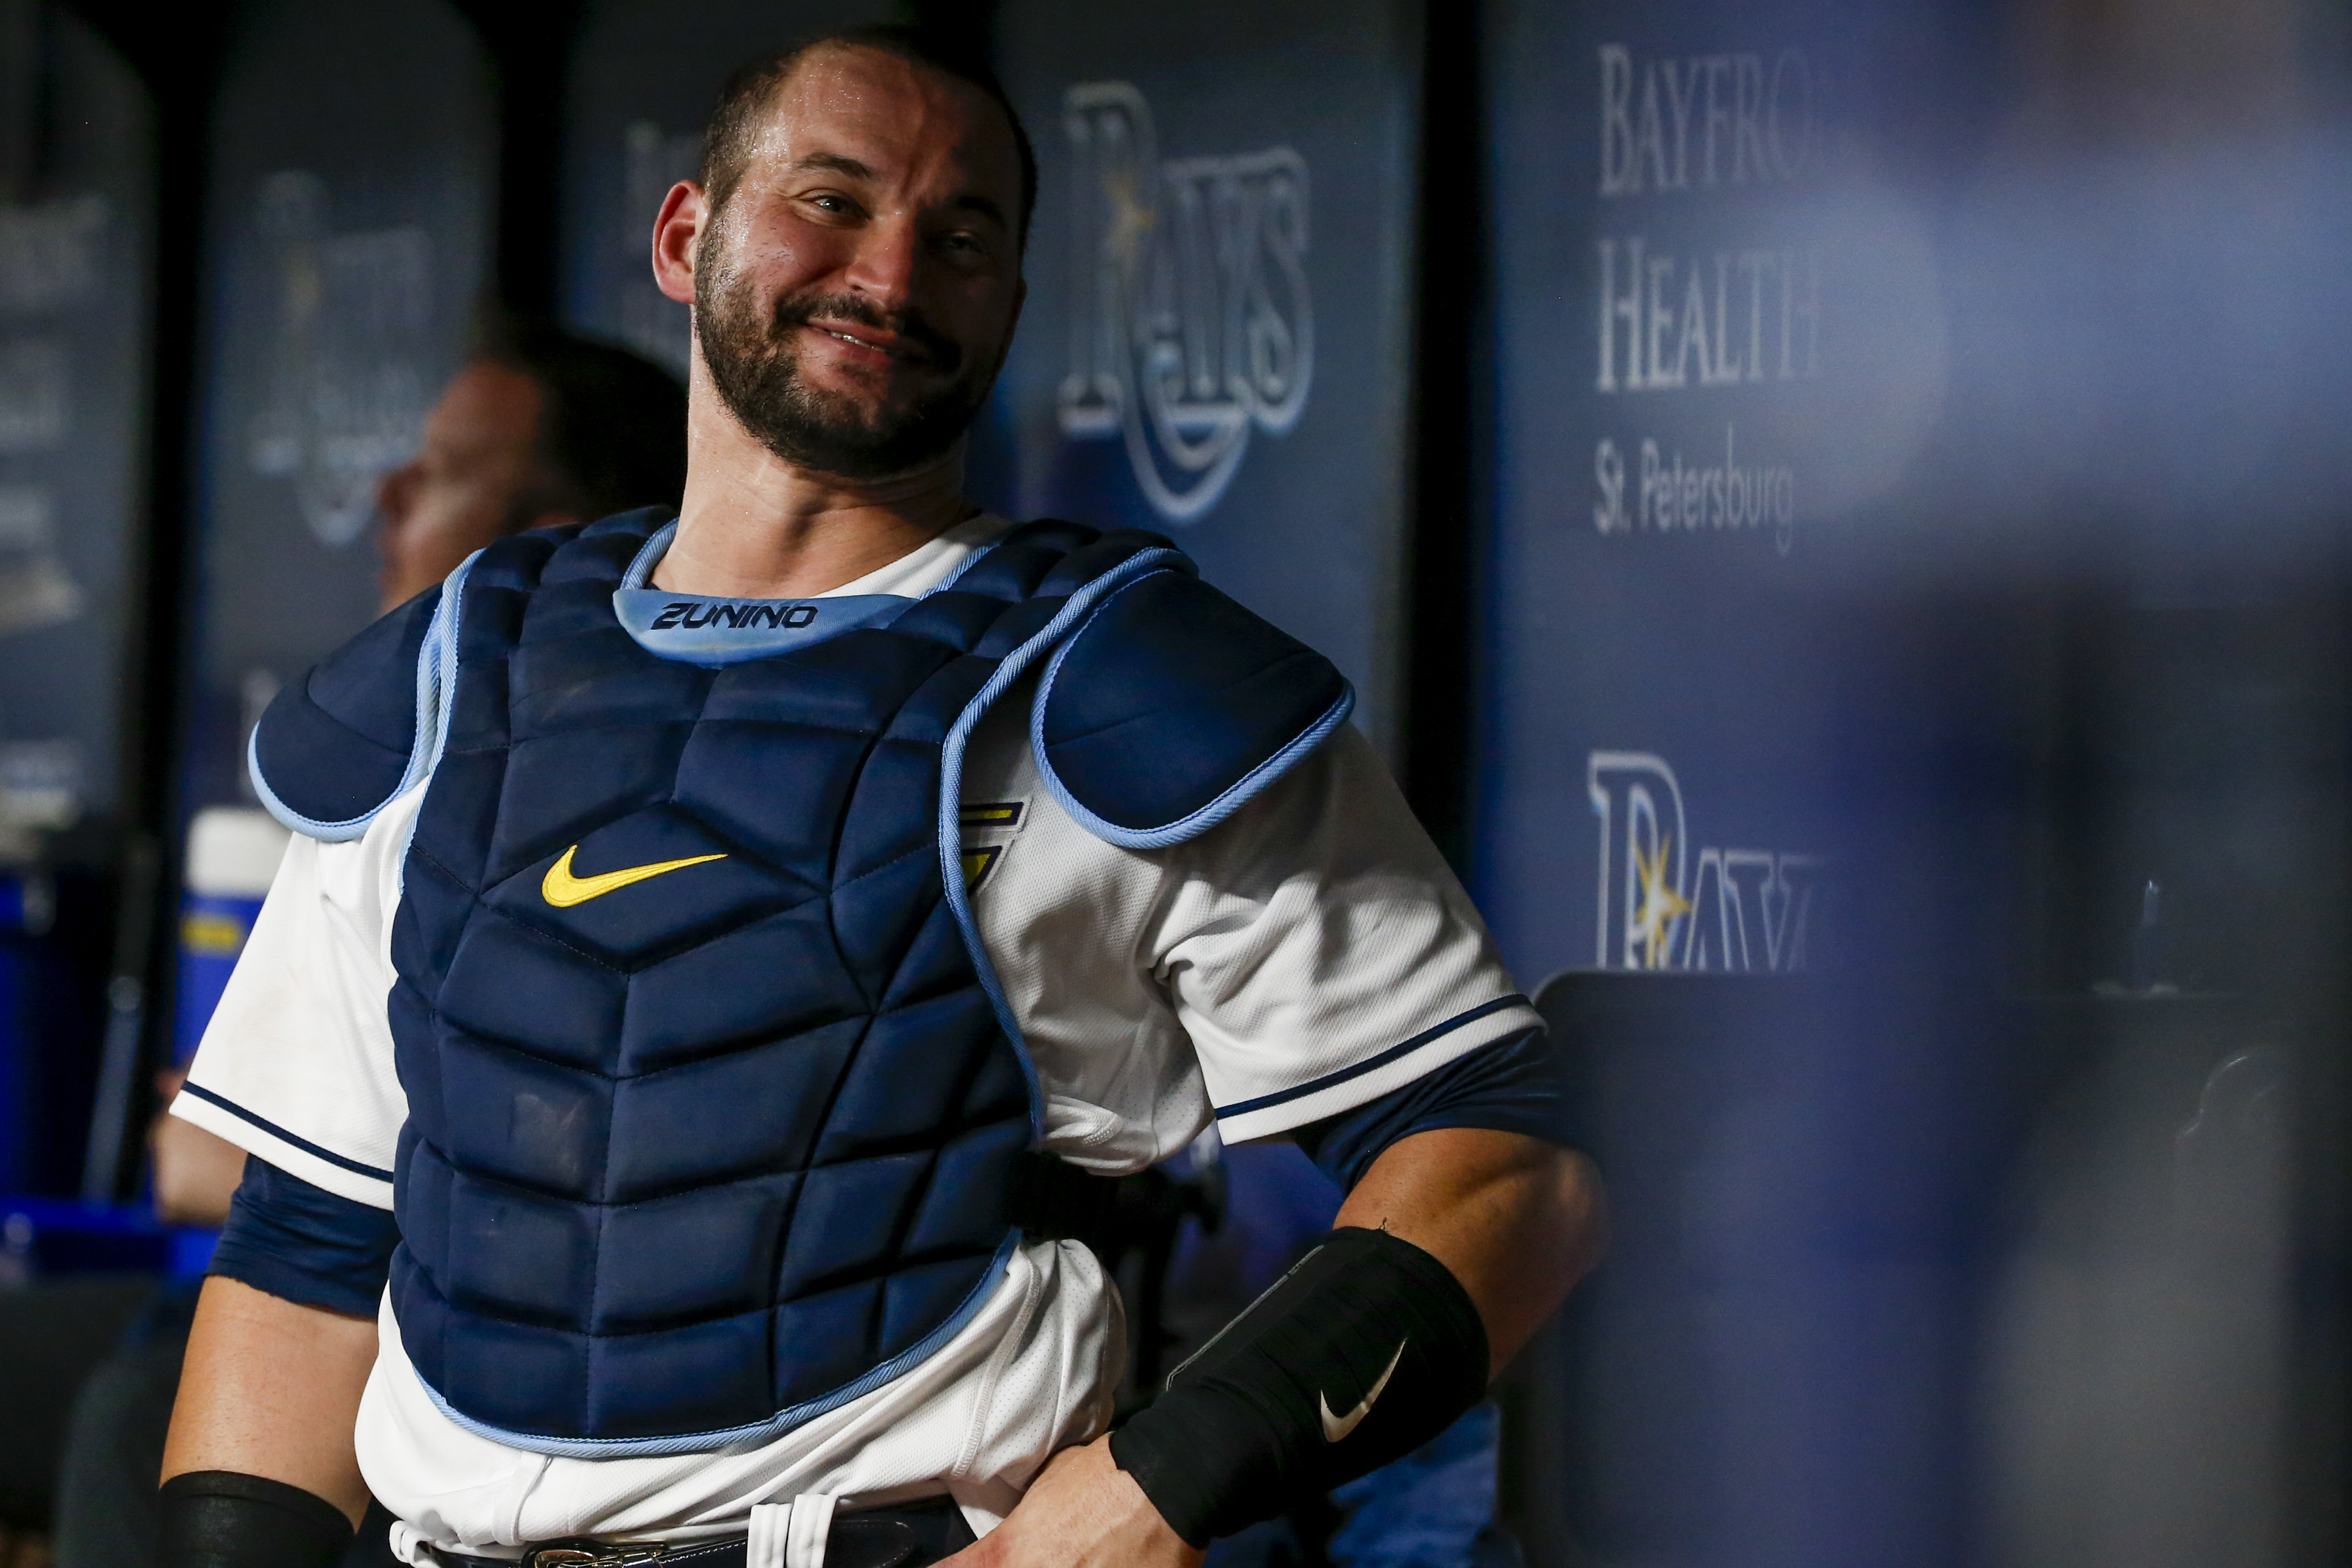 Mike Zunino's Case for the 2021 All-Star Game